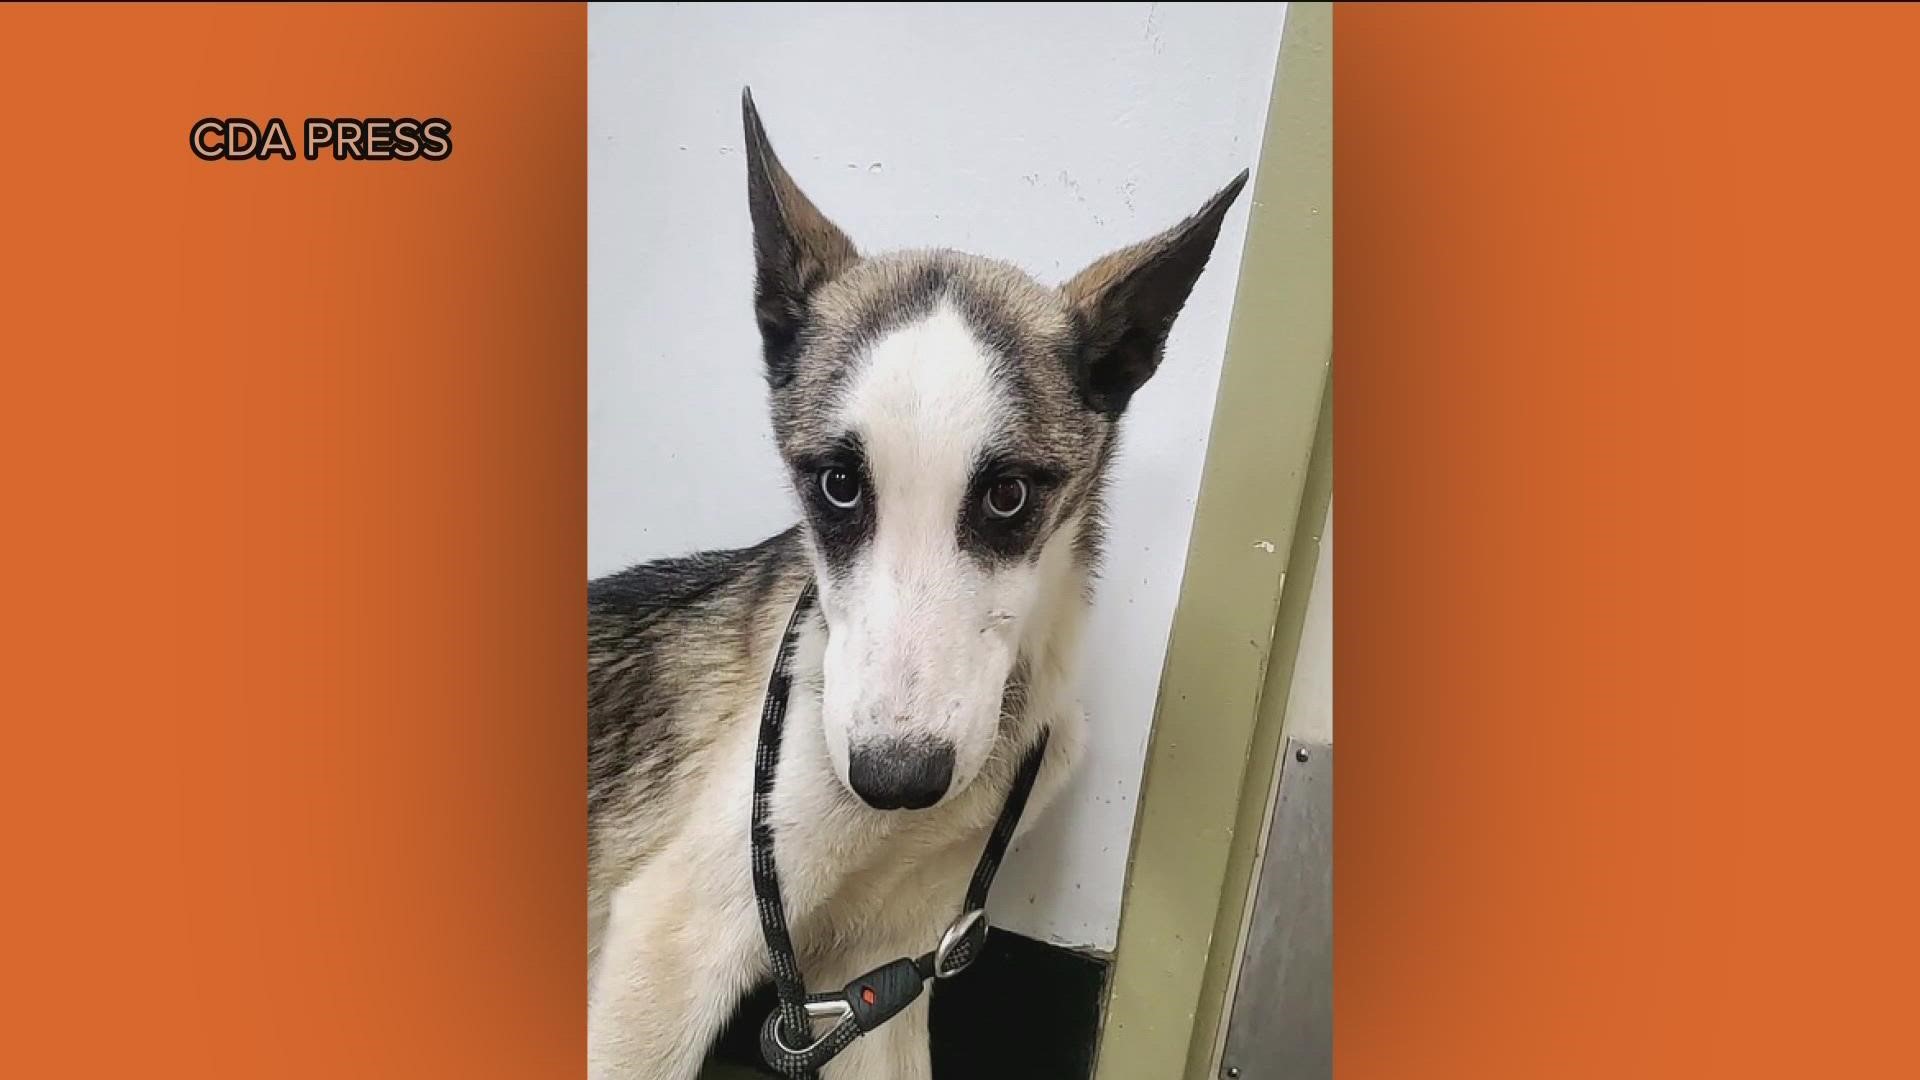 The dogs were found in at least three locations including Spirit Lake, Blanchard and Athol, Bonner County officials said.